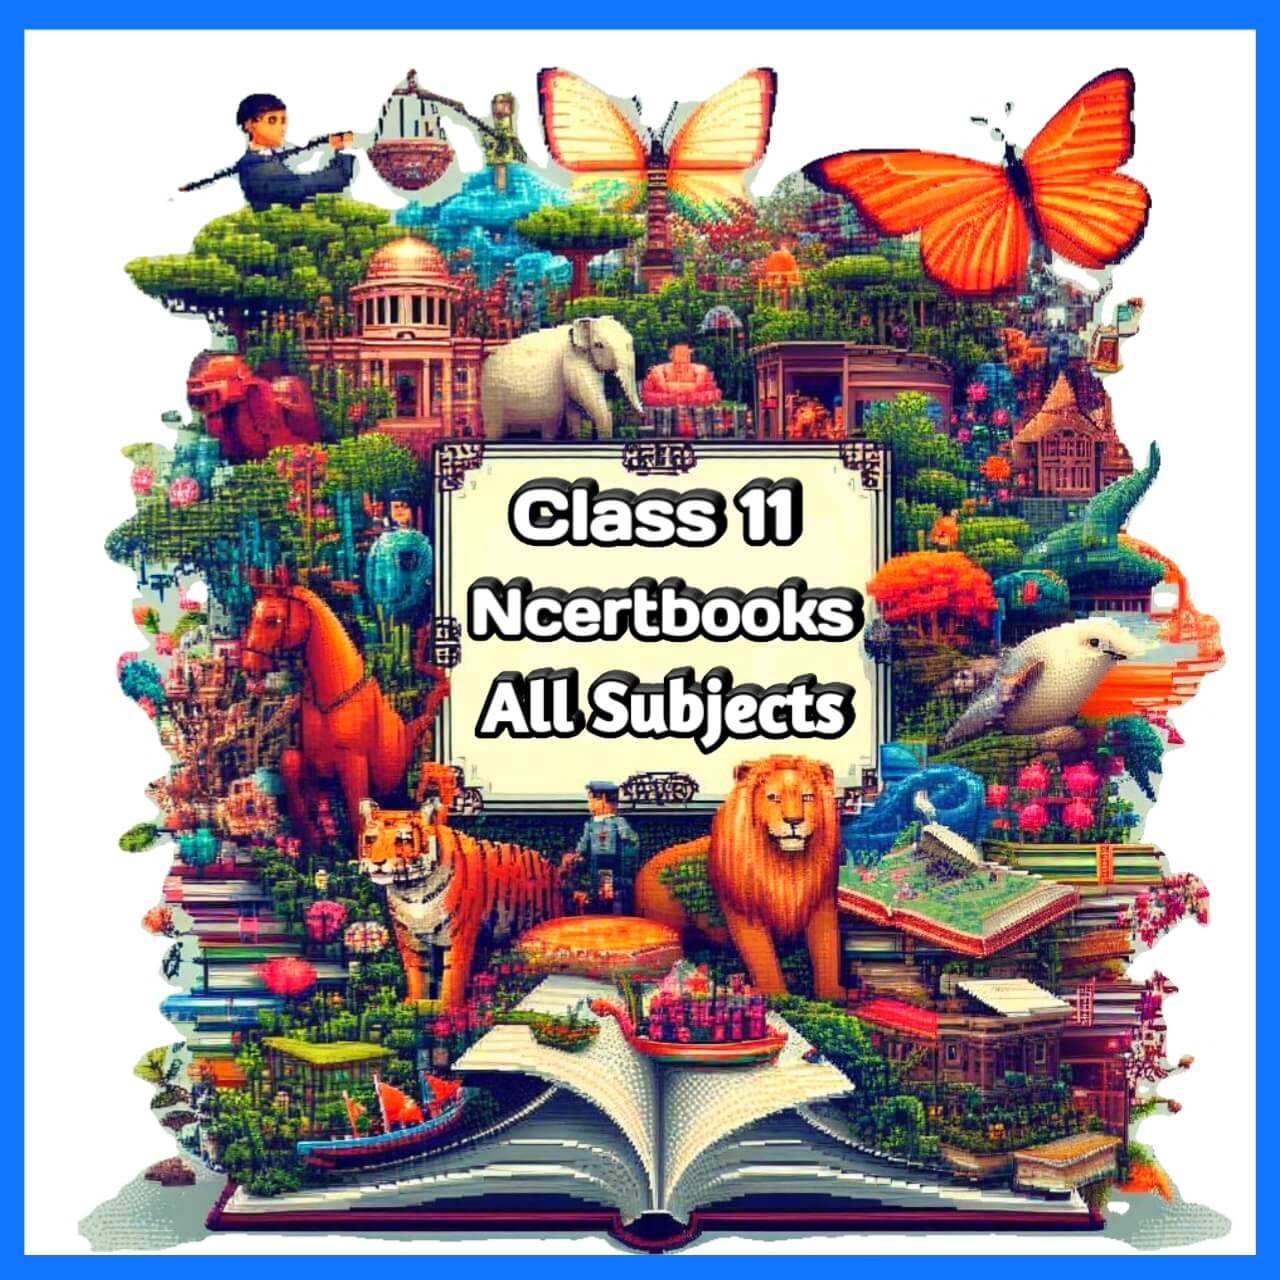 Class 11 All Subjects Ncert books Pdf Download in English